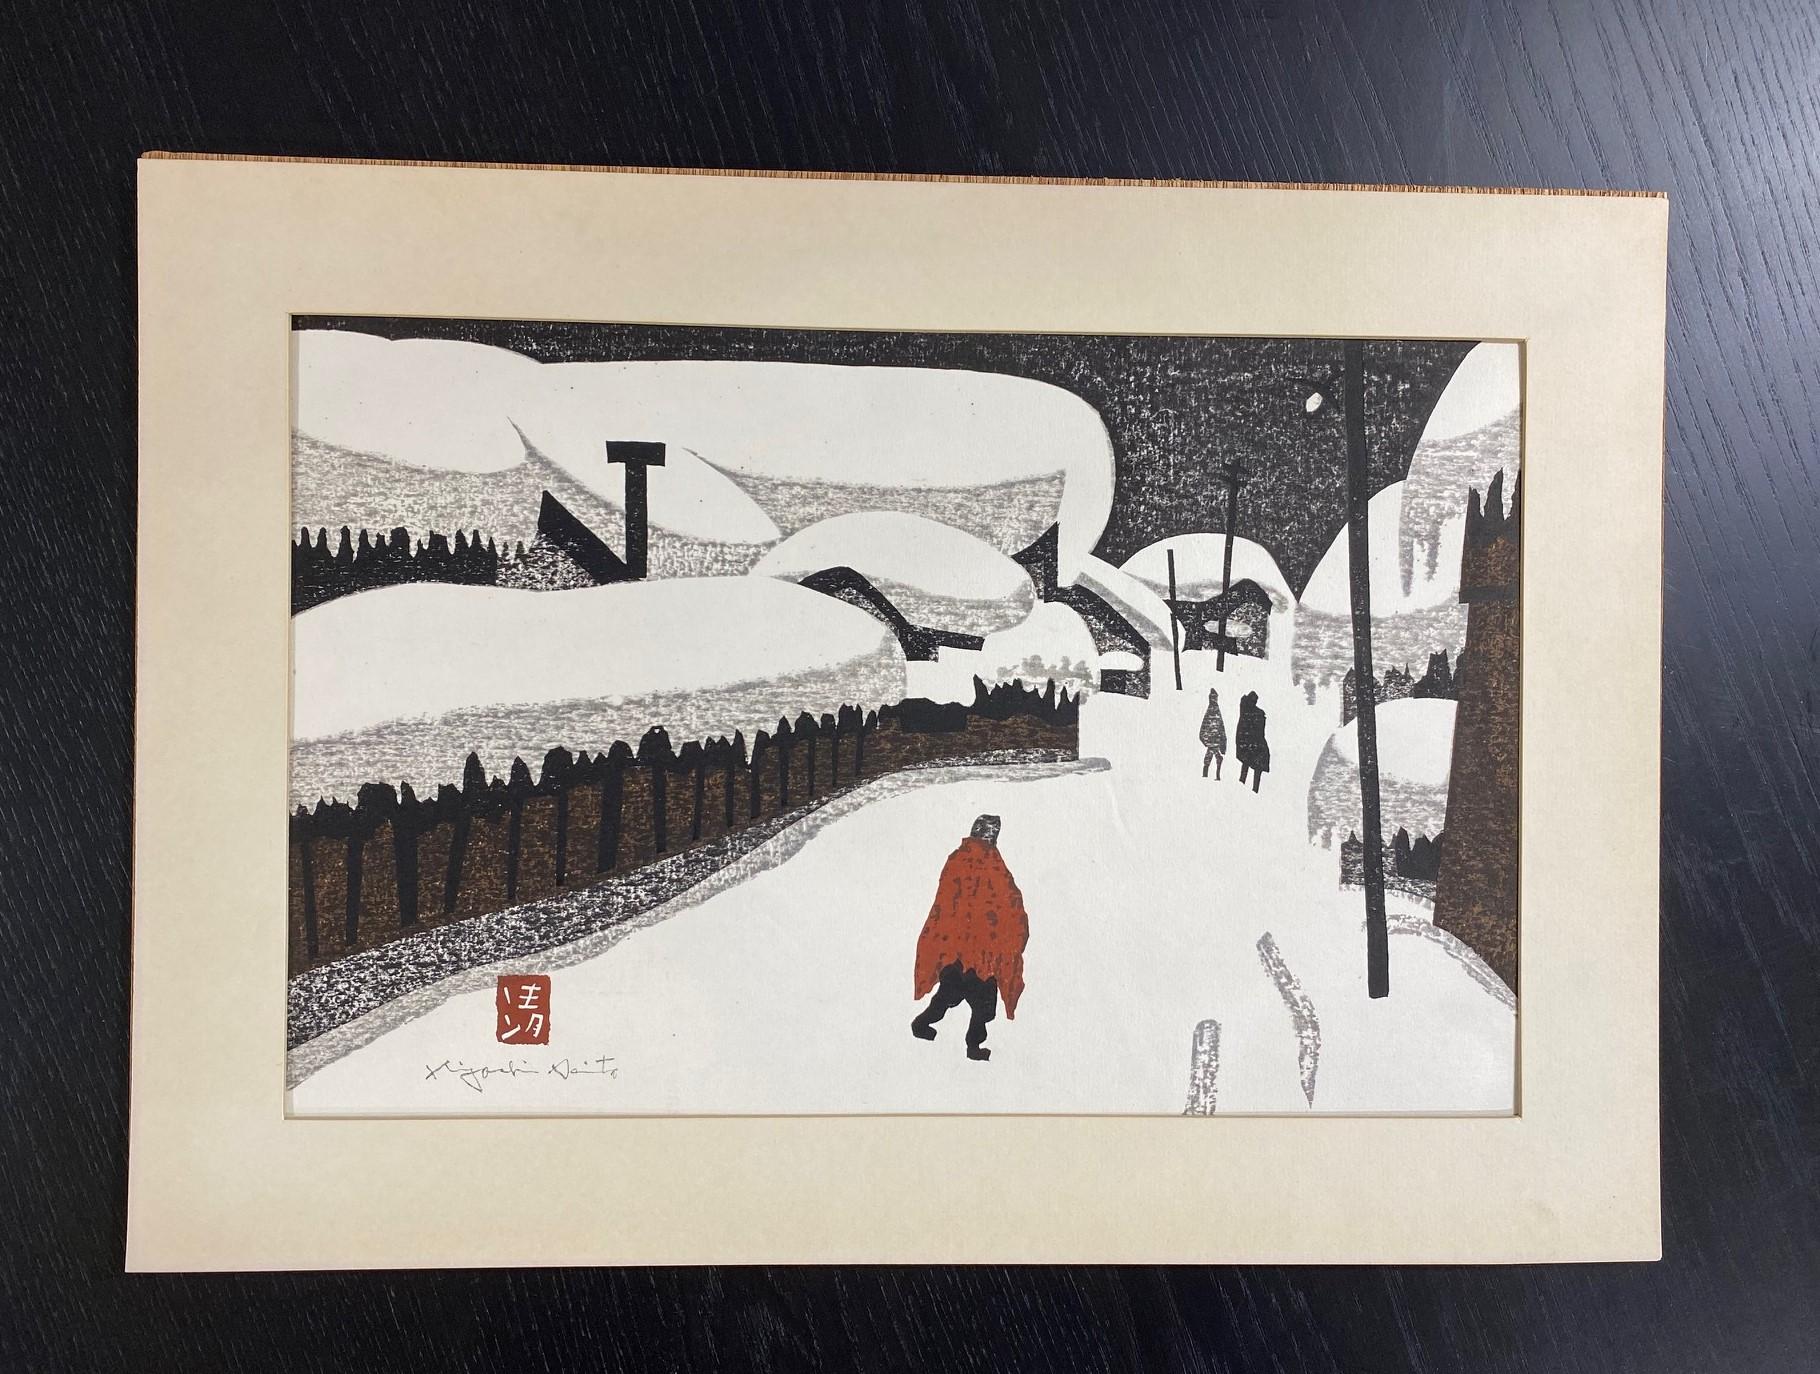 A beautifully composed woodblock print featuring a solitary central figure in a red coat framed by a long line fence by famed Japanese printmaker Kiyoshi Saito. Many consider Saito to be one of the most important, if not the most important,